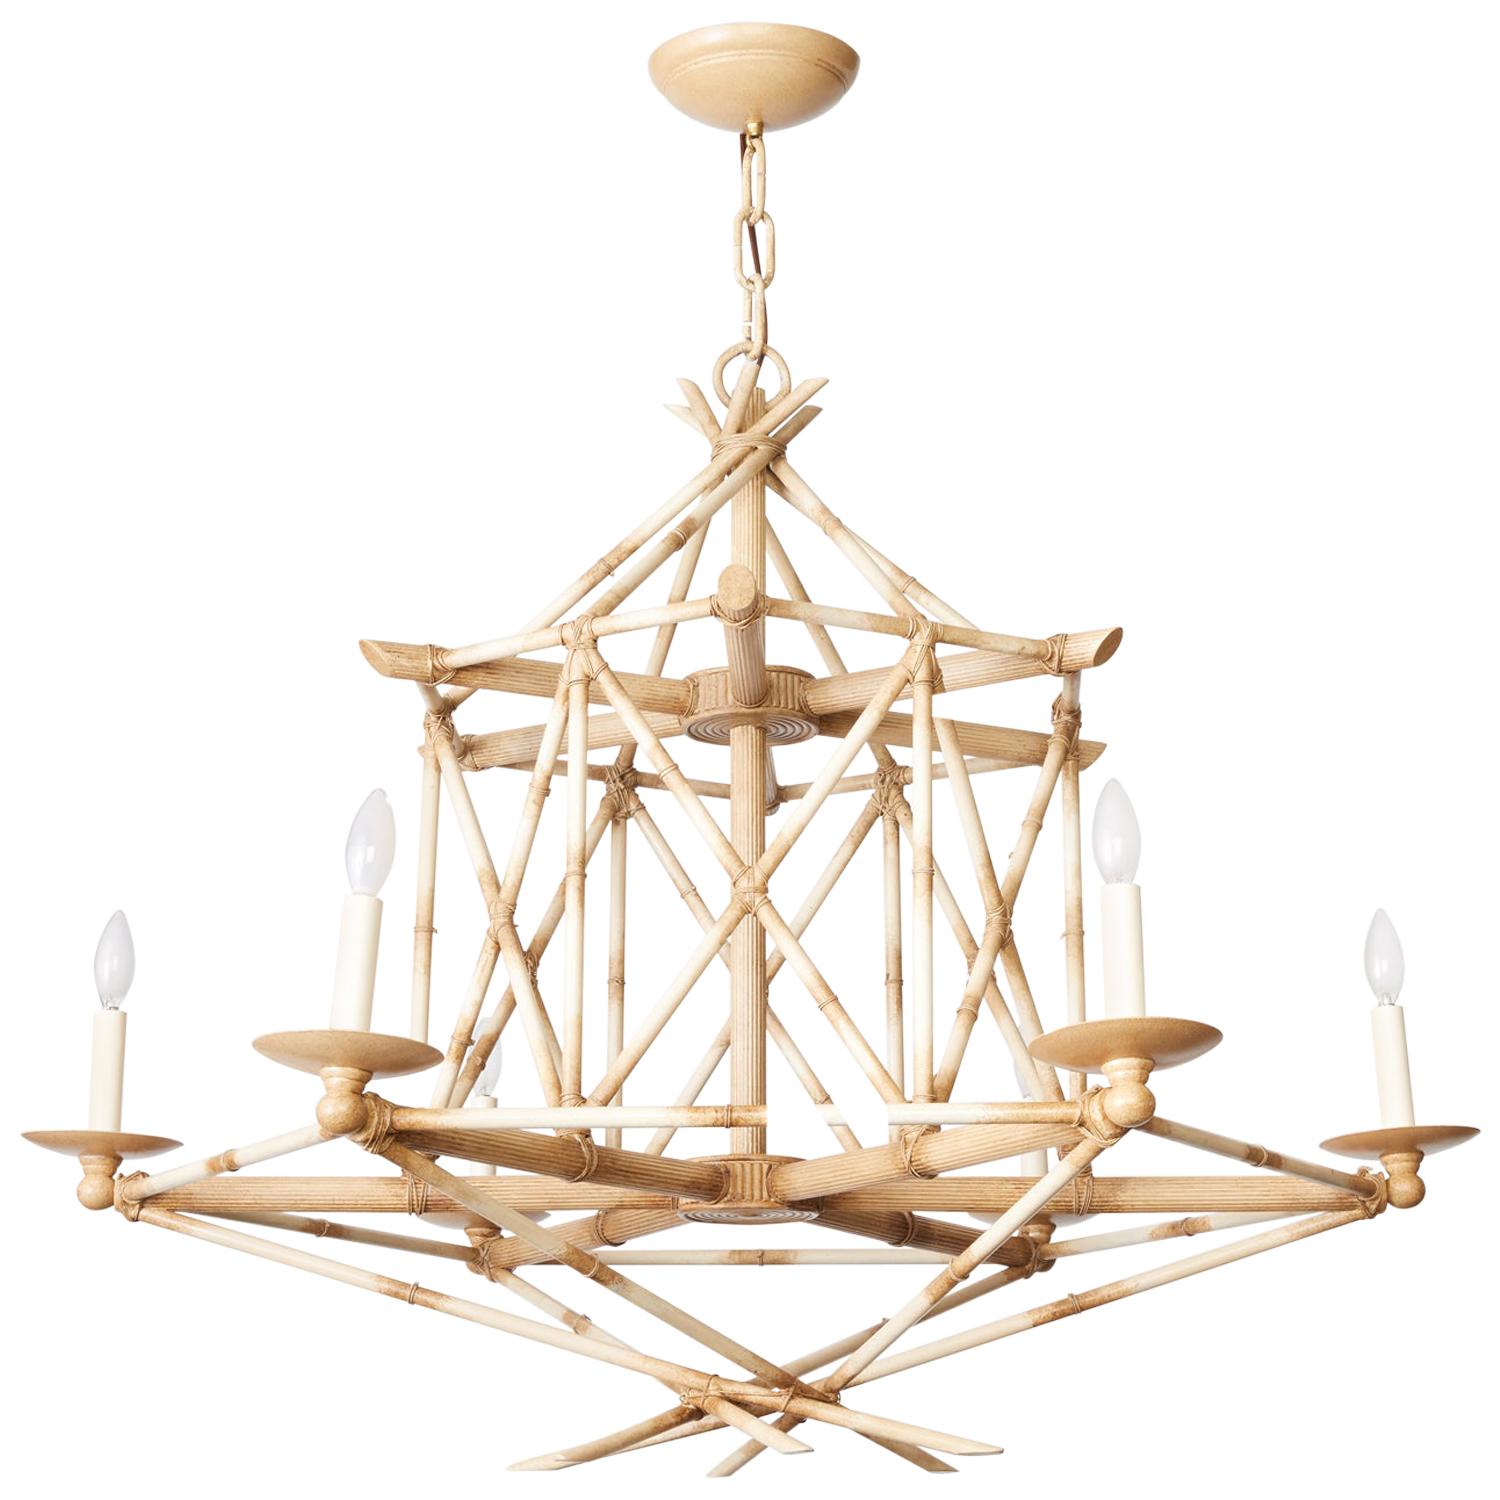 Six Light Bamboo Brûlé Chandelier Ceiling Light, Hand Painted Faux Bamboo For Sale